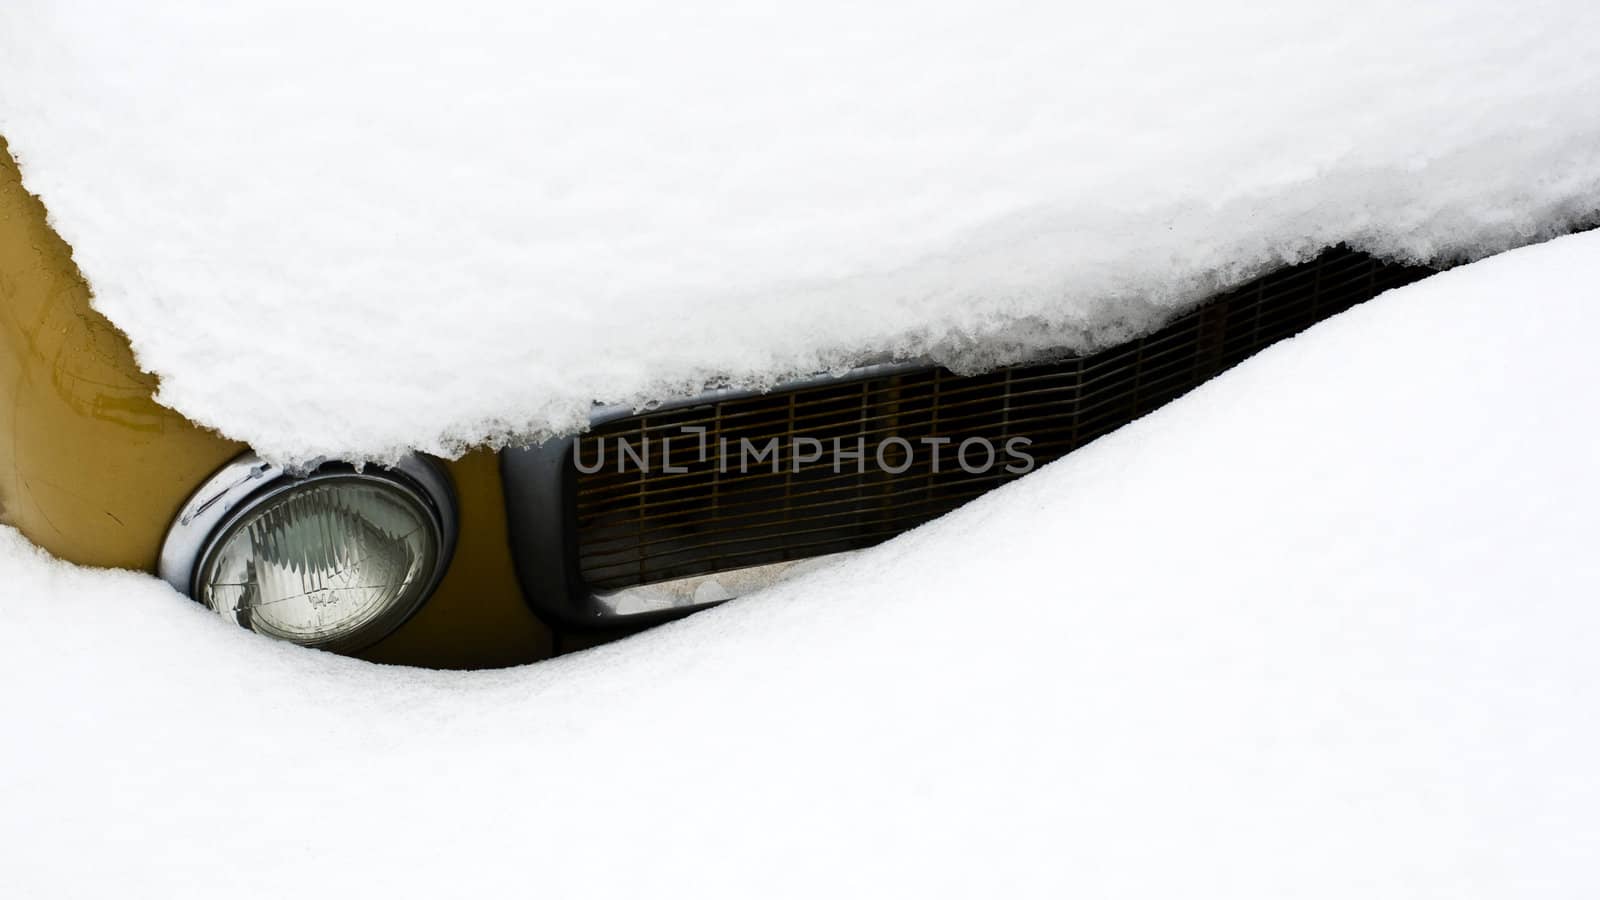 The front and headlight of a car covered in snow